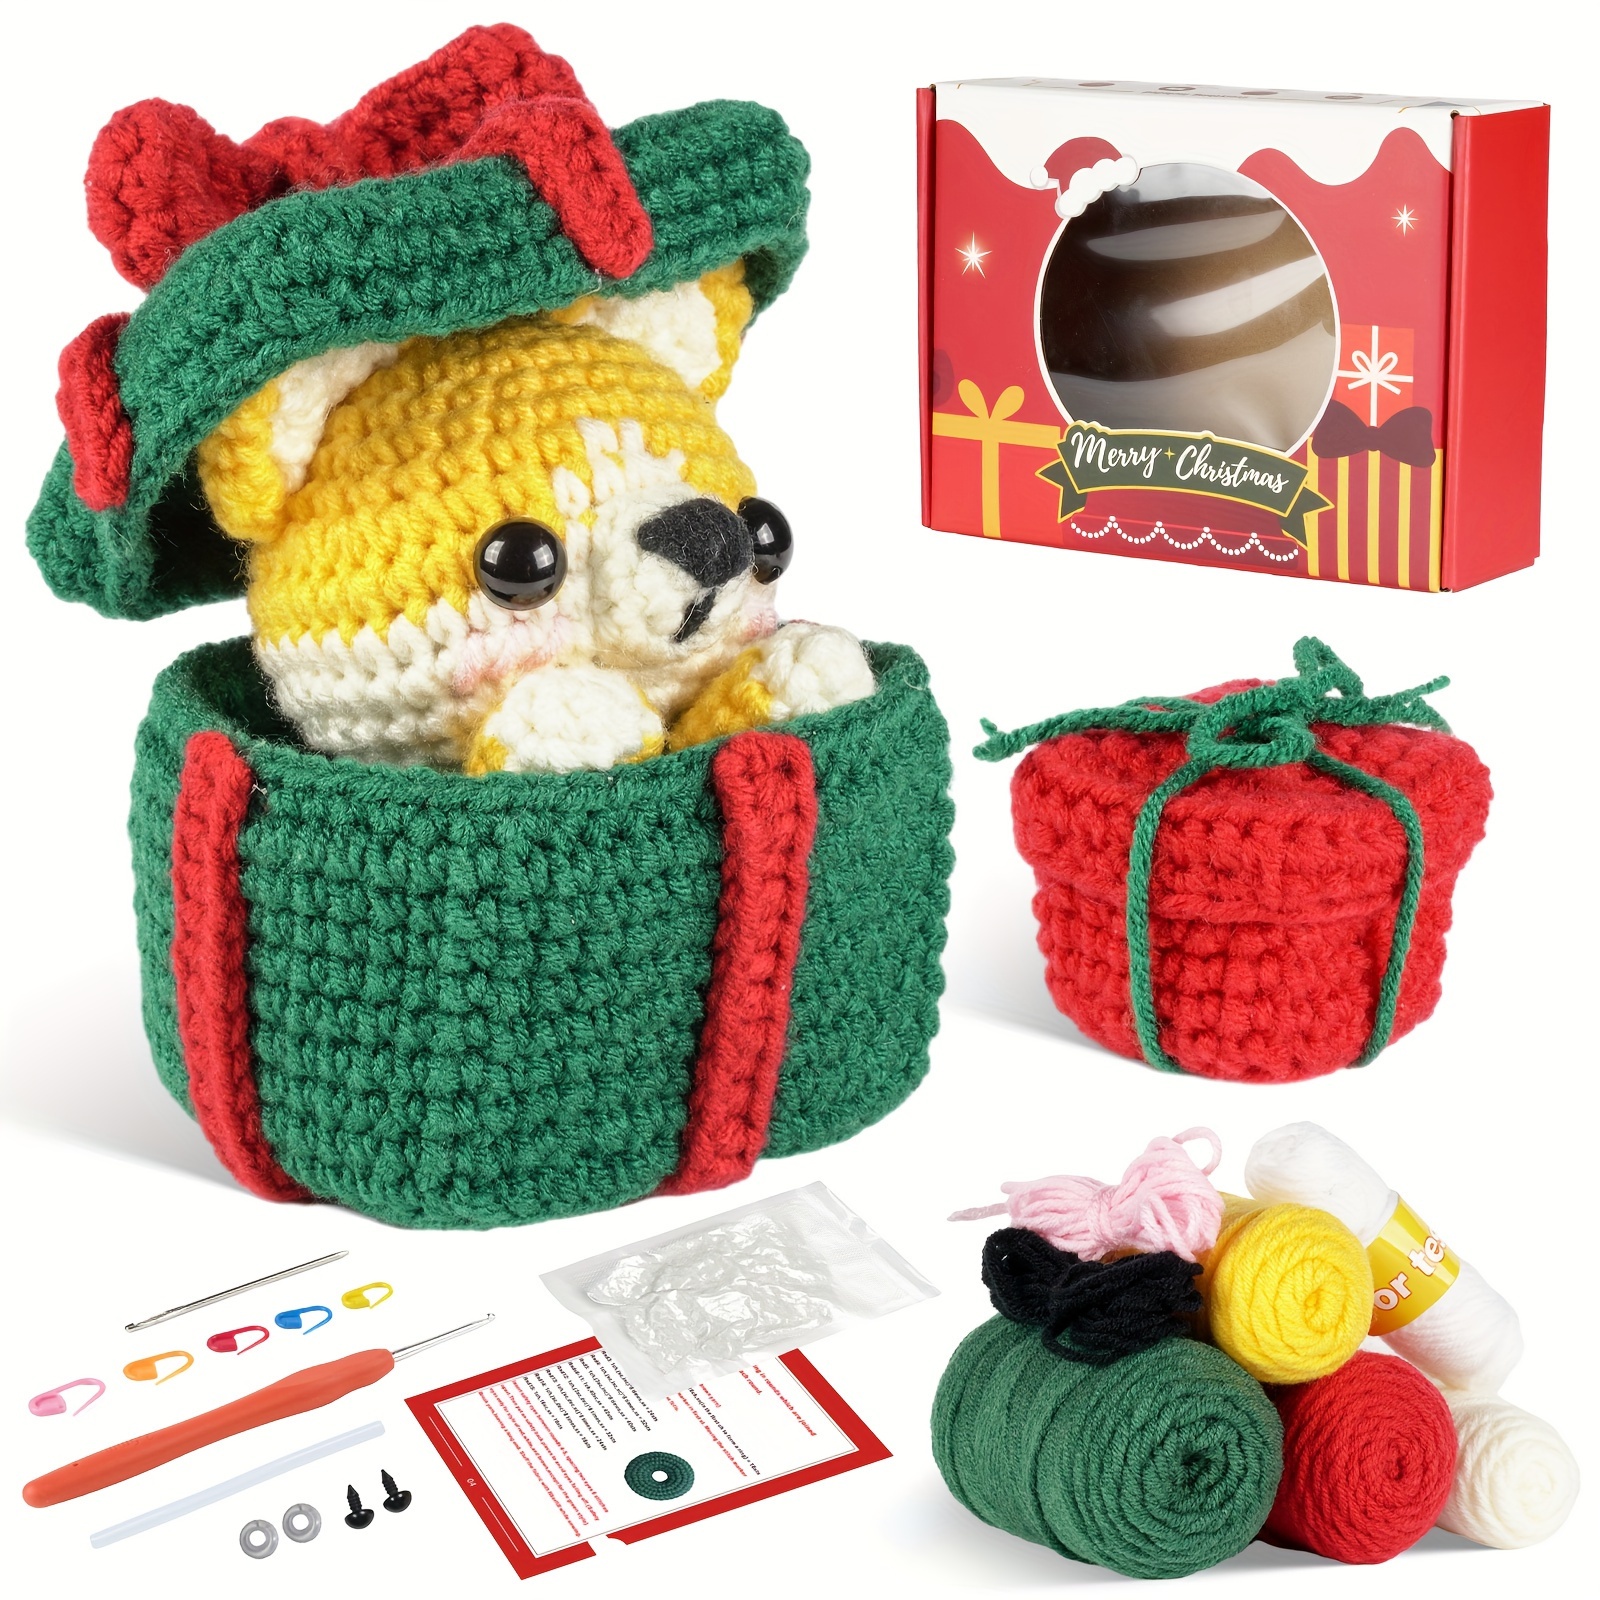  Crochet Kit for Beginners,Crochet Kits for Adults,Crochet  Materials Pack, Includes Yarns, Hook, Accessories,Crocheting Knitting Kit  with Step-by-Step Video Tutorials .(Little Daisy)